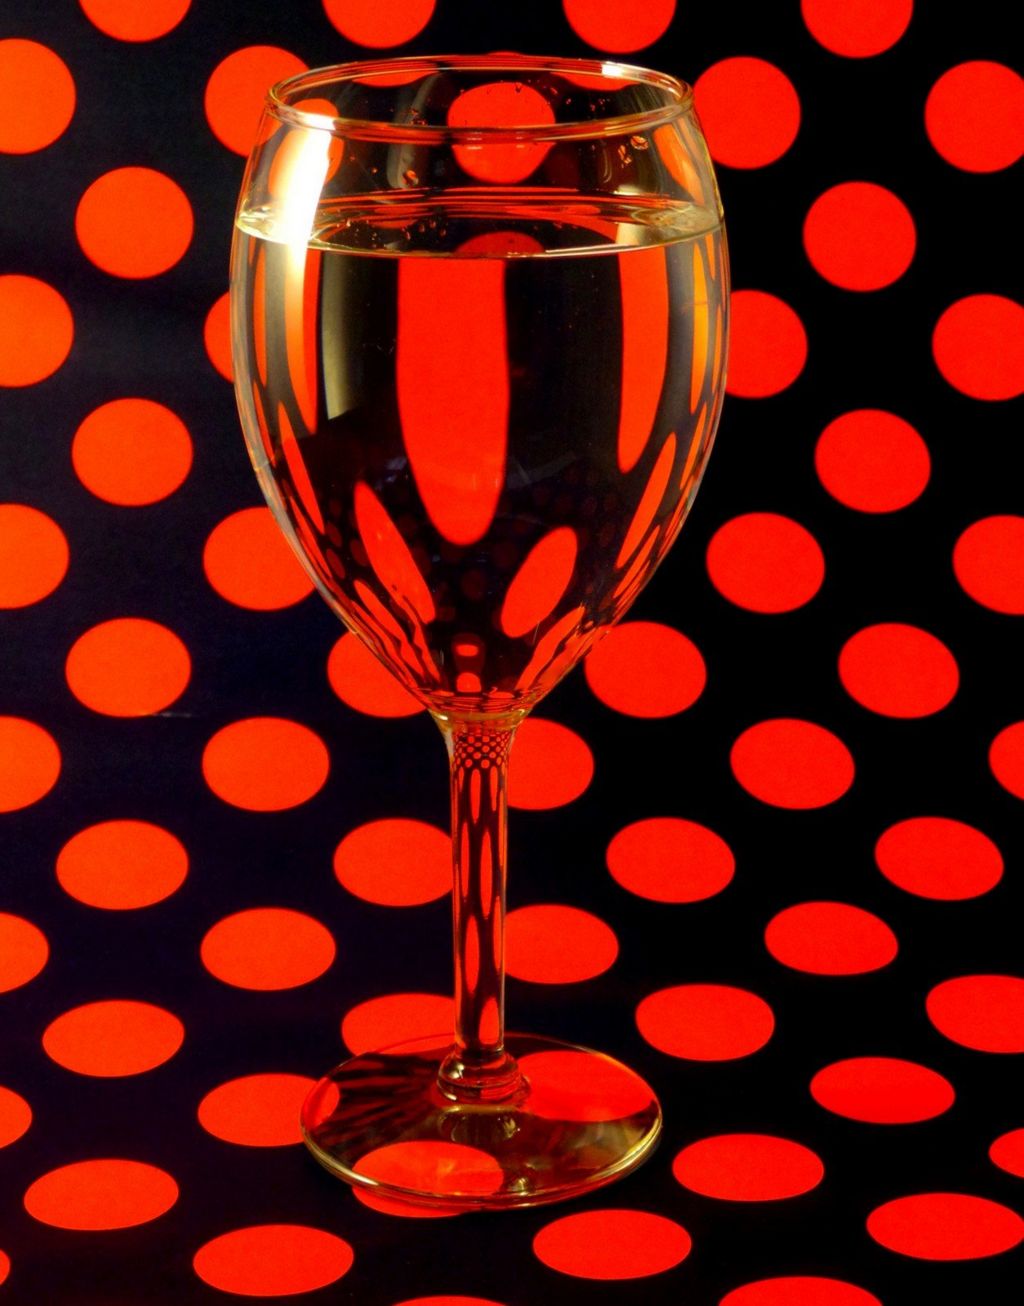 Red circles behind a glass of wine